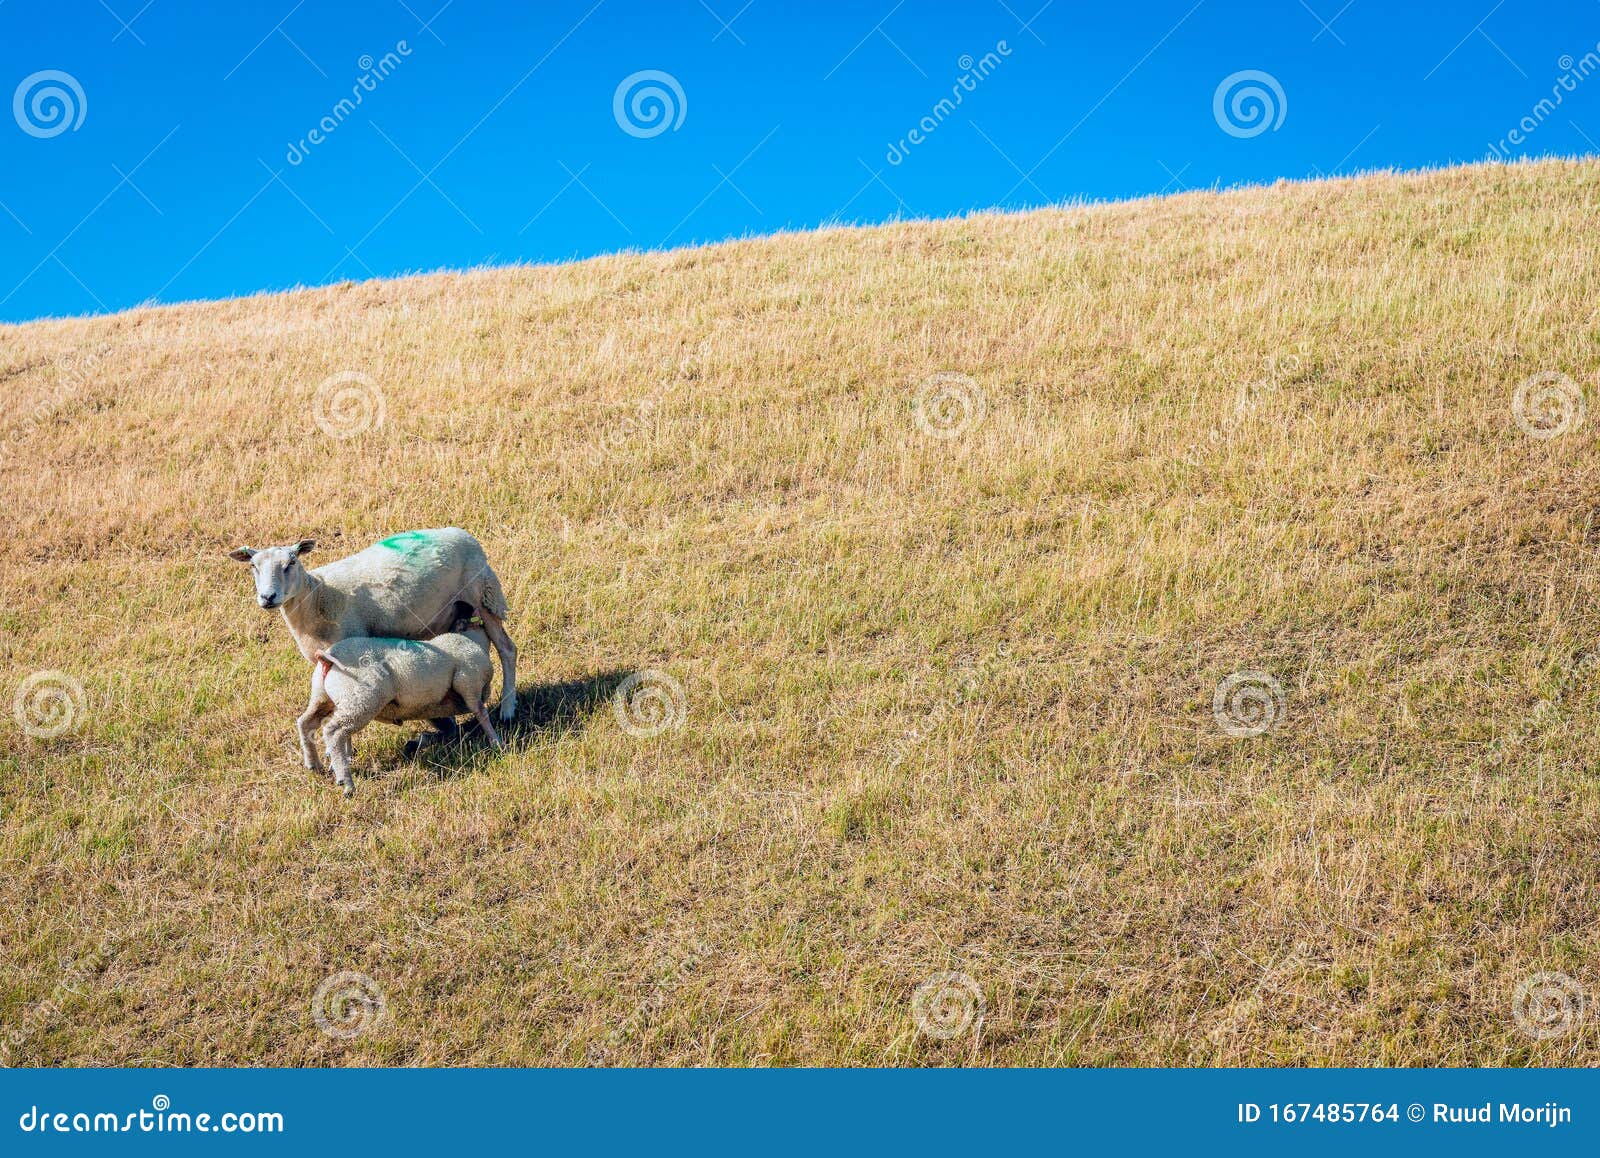 Lamb Drinks Milk from Its Mother Sheep Stock Photo - Image of grass ...